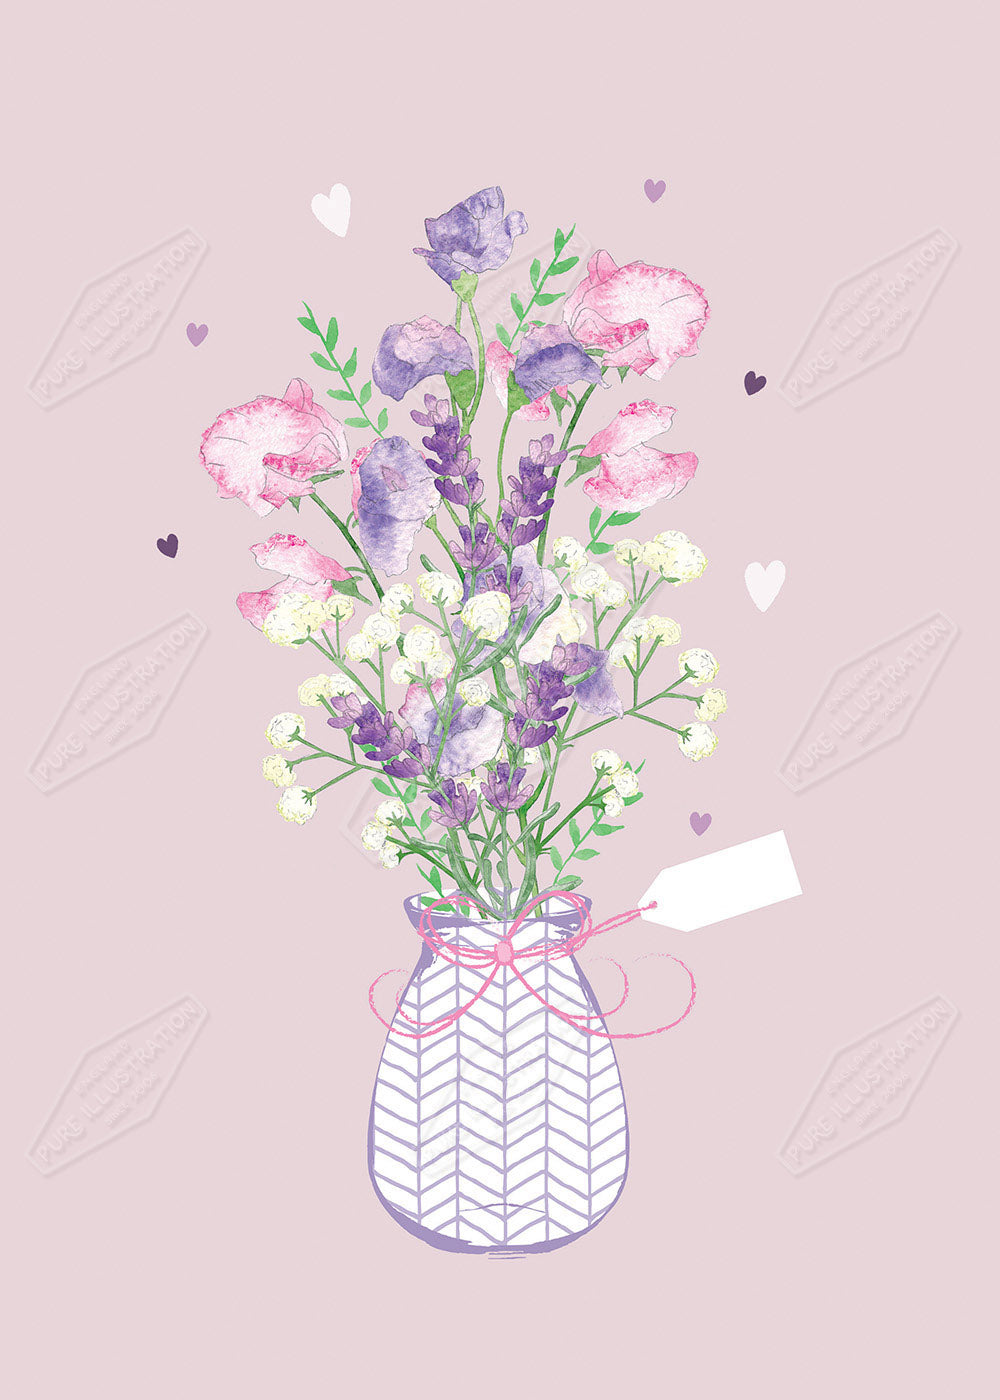 Vase of Flowers Design by Victoria Marks for Pure Art Licensing Agency & Surface Design Studio